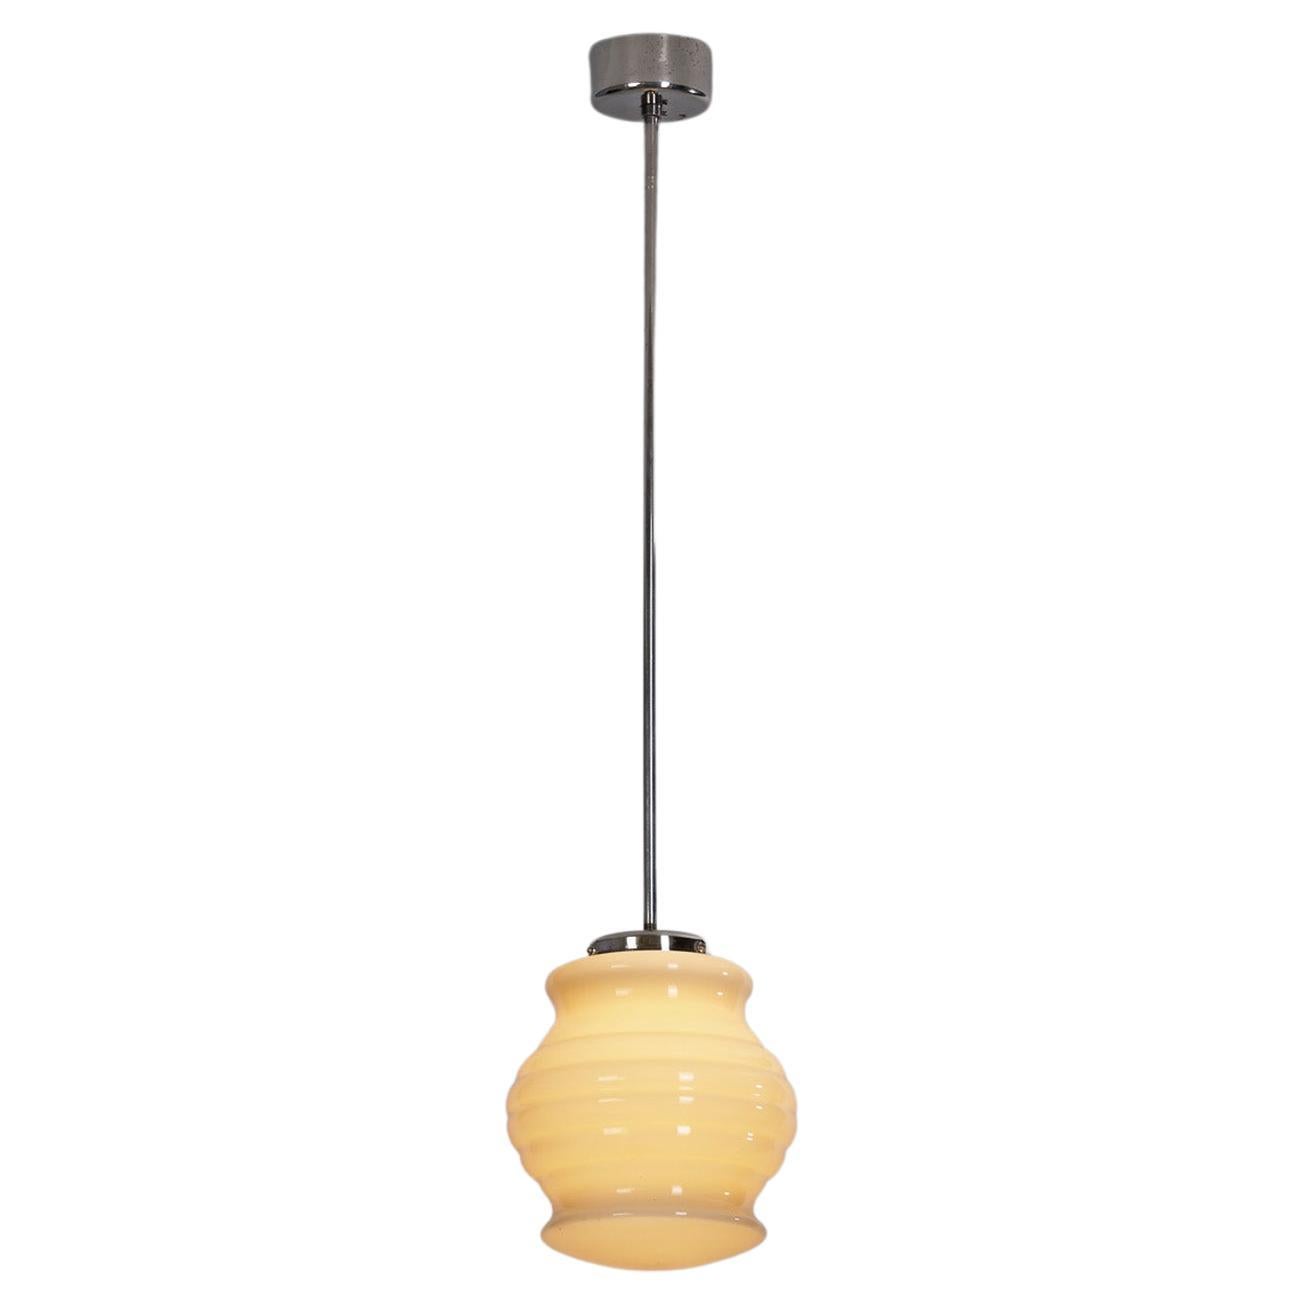 Paavo Tynell Model "556" Pendant Light for Taito Oy, Finland, 1930s For Sale